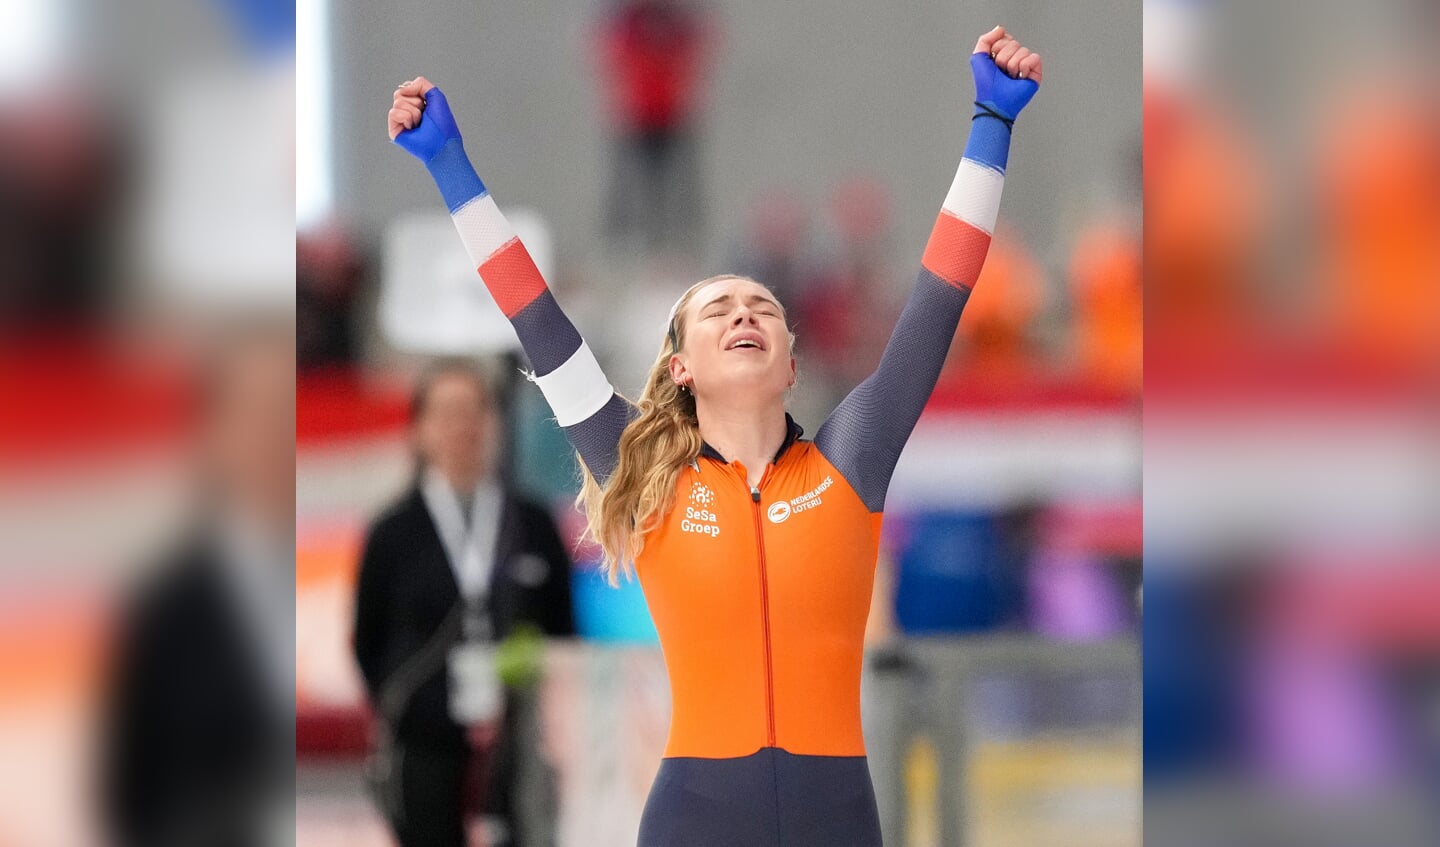 INZELL, GERMANY - MARCH 10: Joy Beune of The Netherlands celebrating her win after competing on the Women's 5000m during the ISU World Speed Skating Allround Championships at Max Aicher Arena on March 10, 2024 in Inzell, Germany. (Photo by Douwe Bijlsma/Orange Pictures)